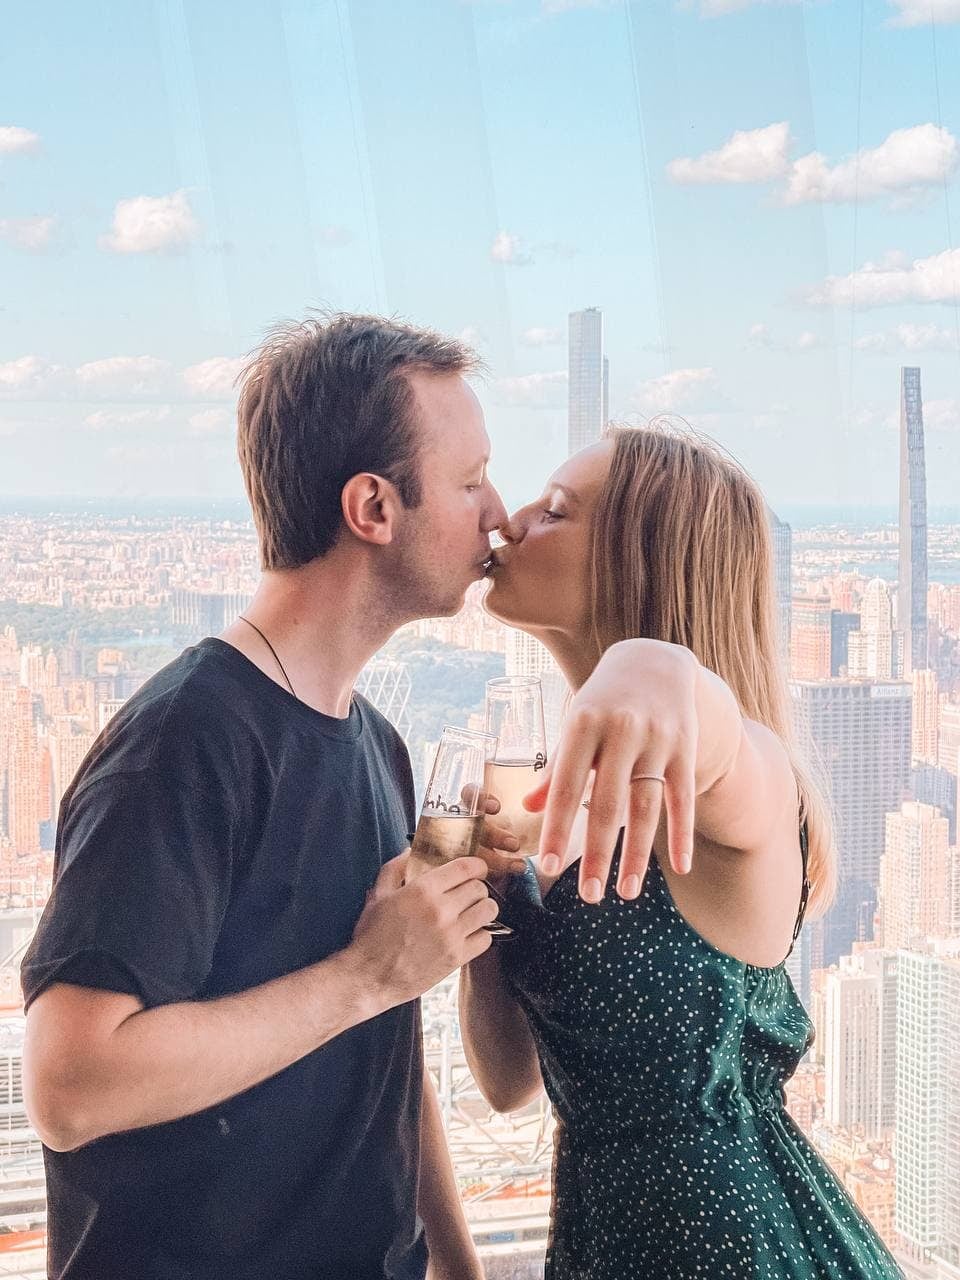 Andrew Rayel and Daniela Prisacaru announce their engagement with a passionate kiss. 